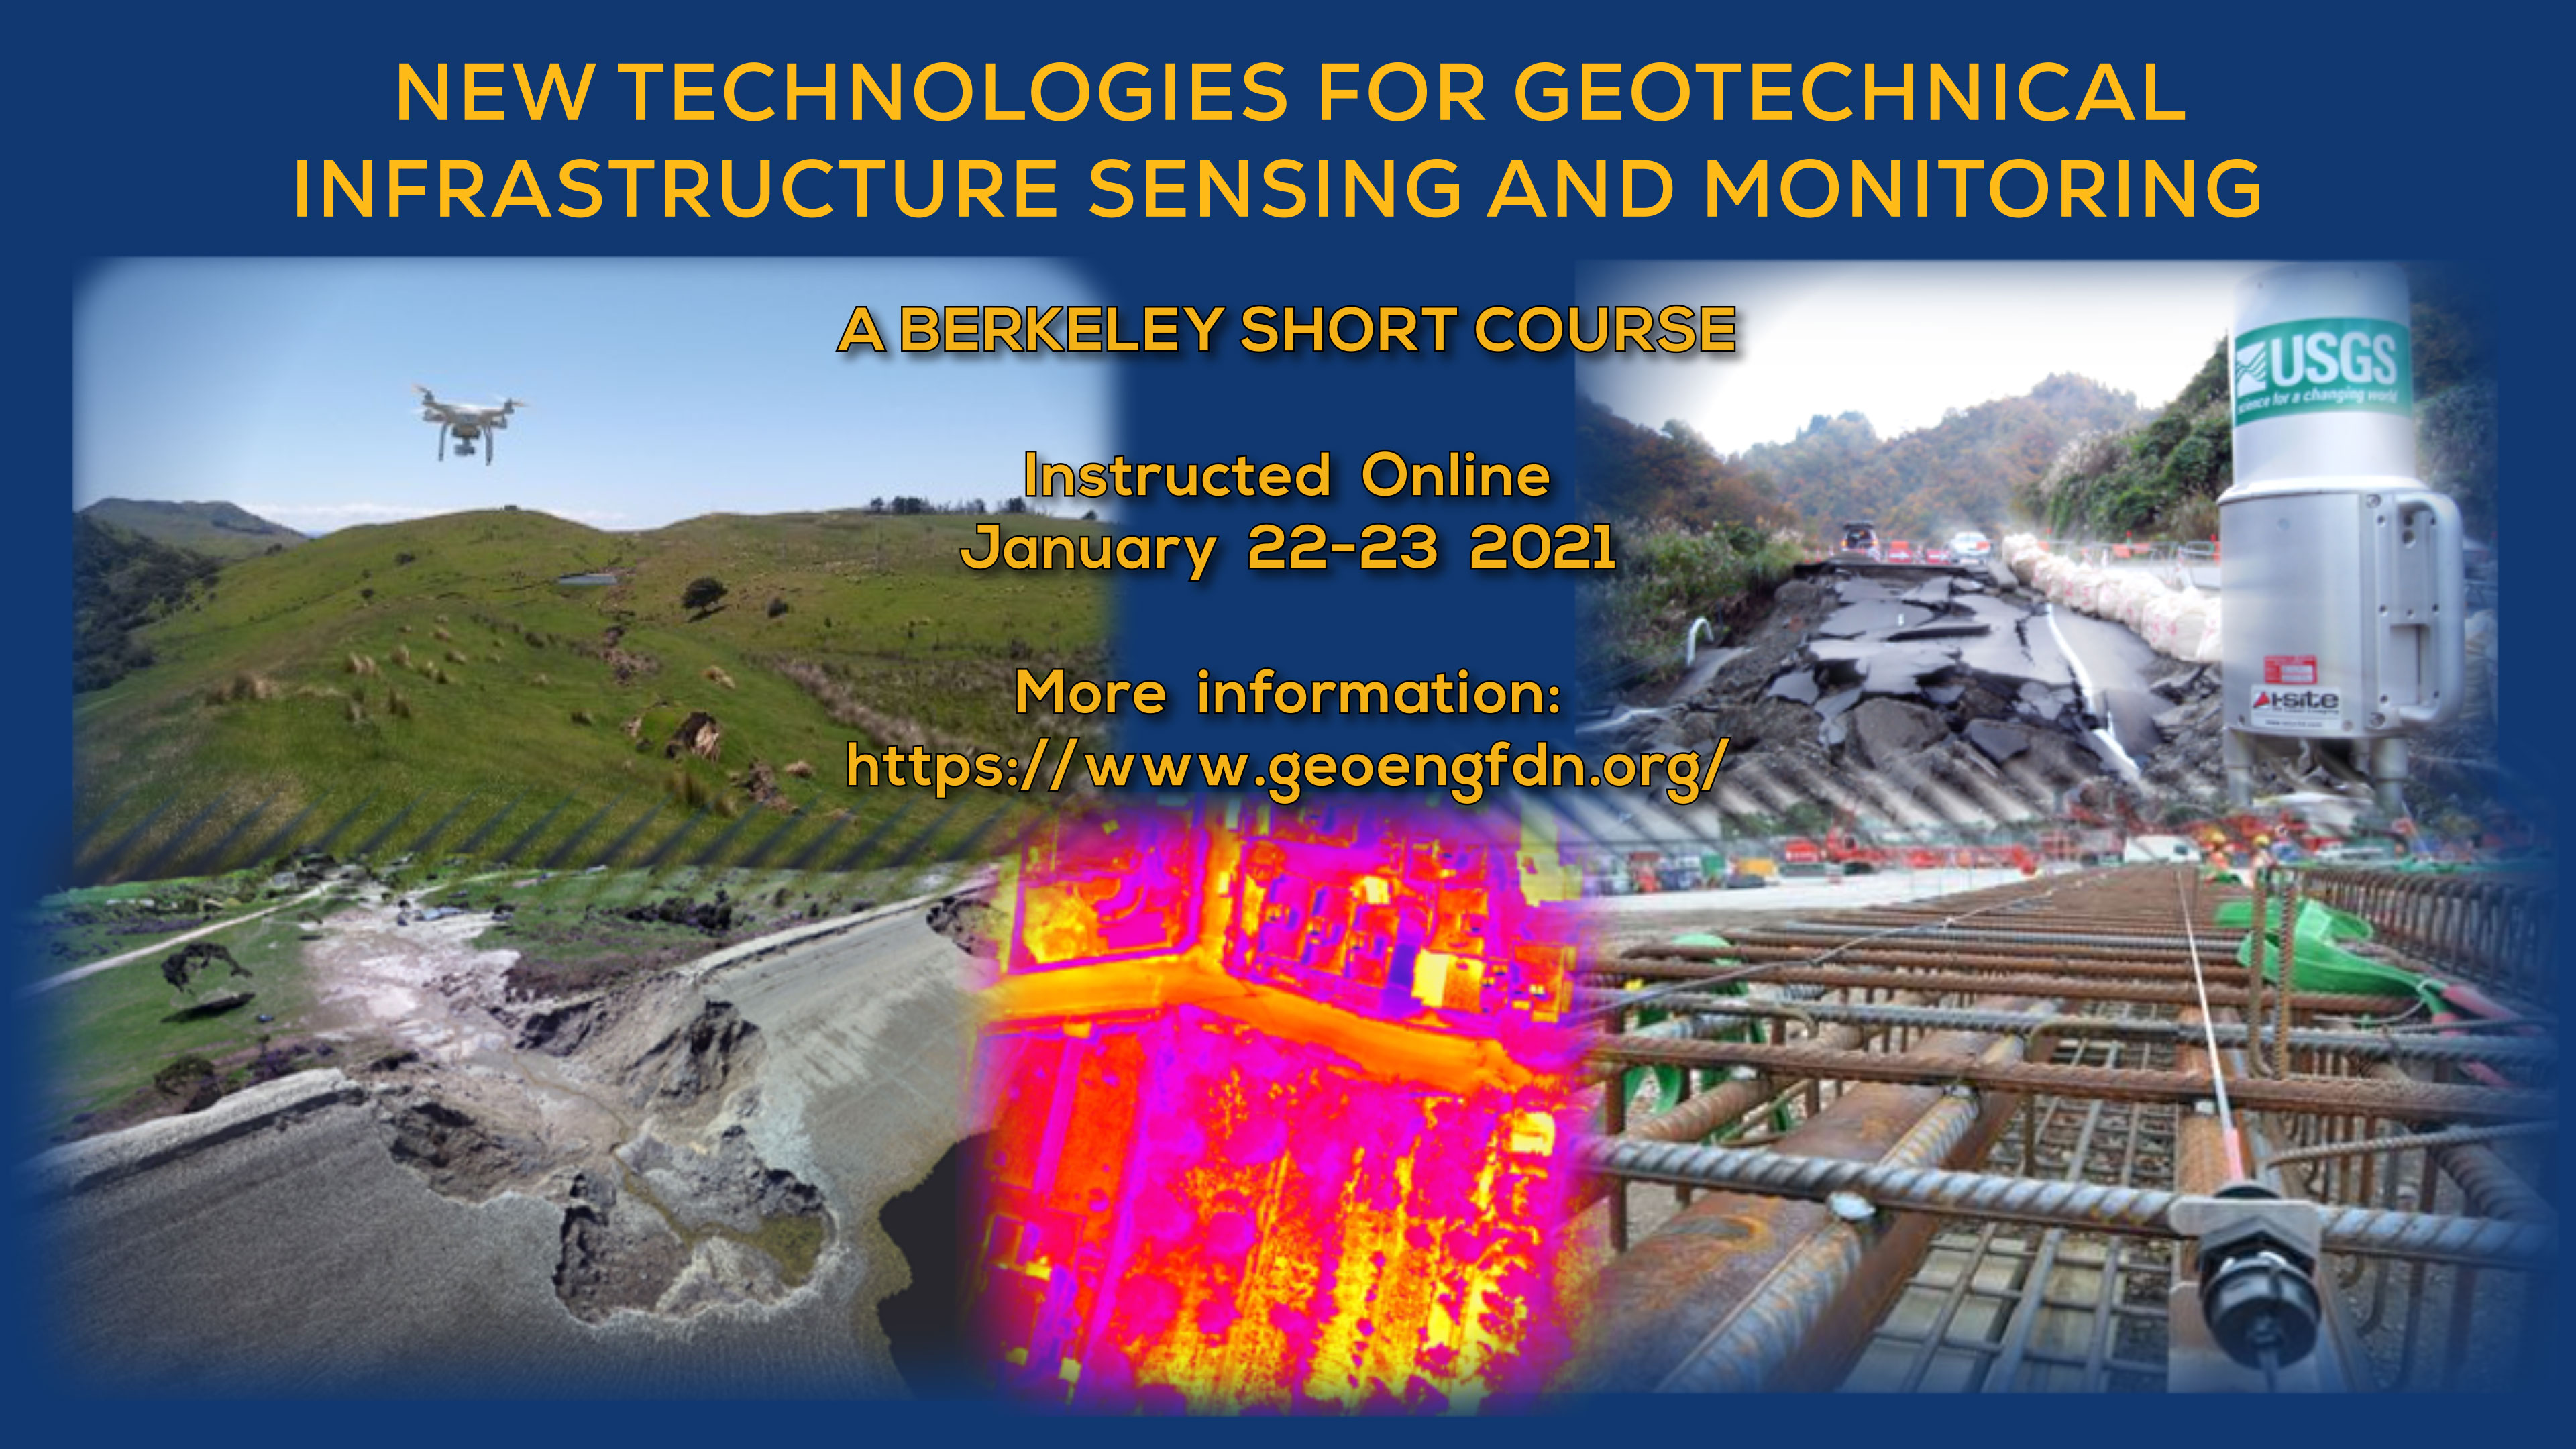 January 22-23 2021: Short Course on "New Technologies for Geotechnical Infrastructure Sensing and Monitoring"